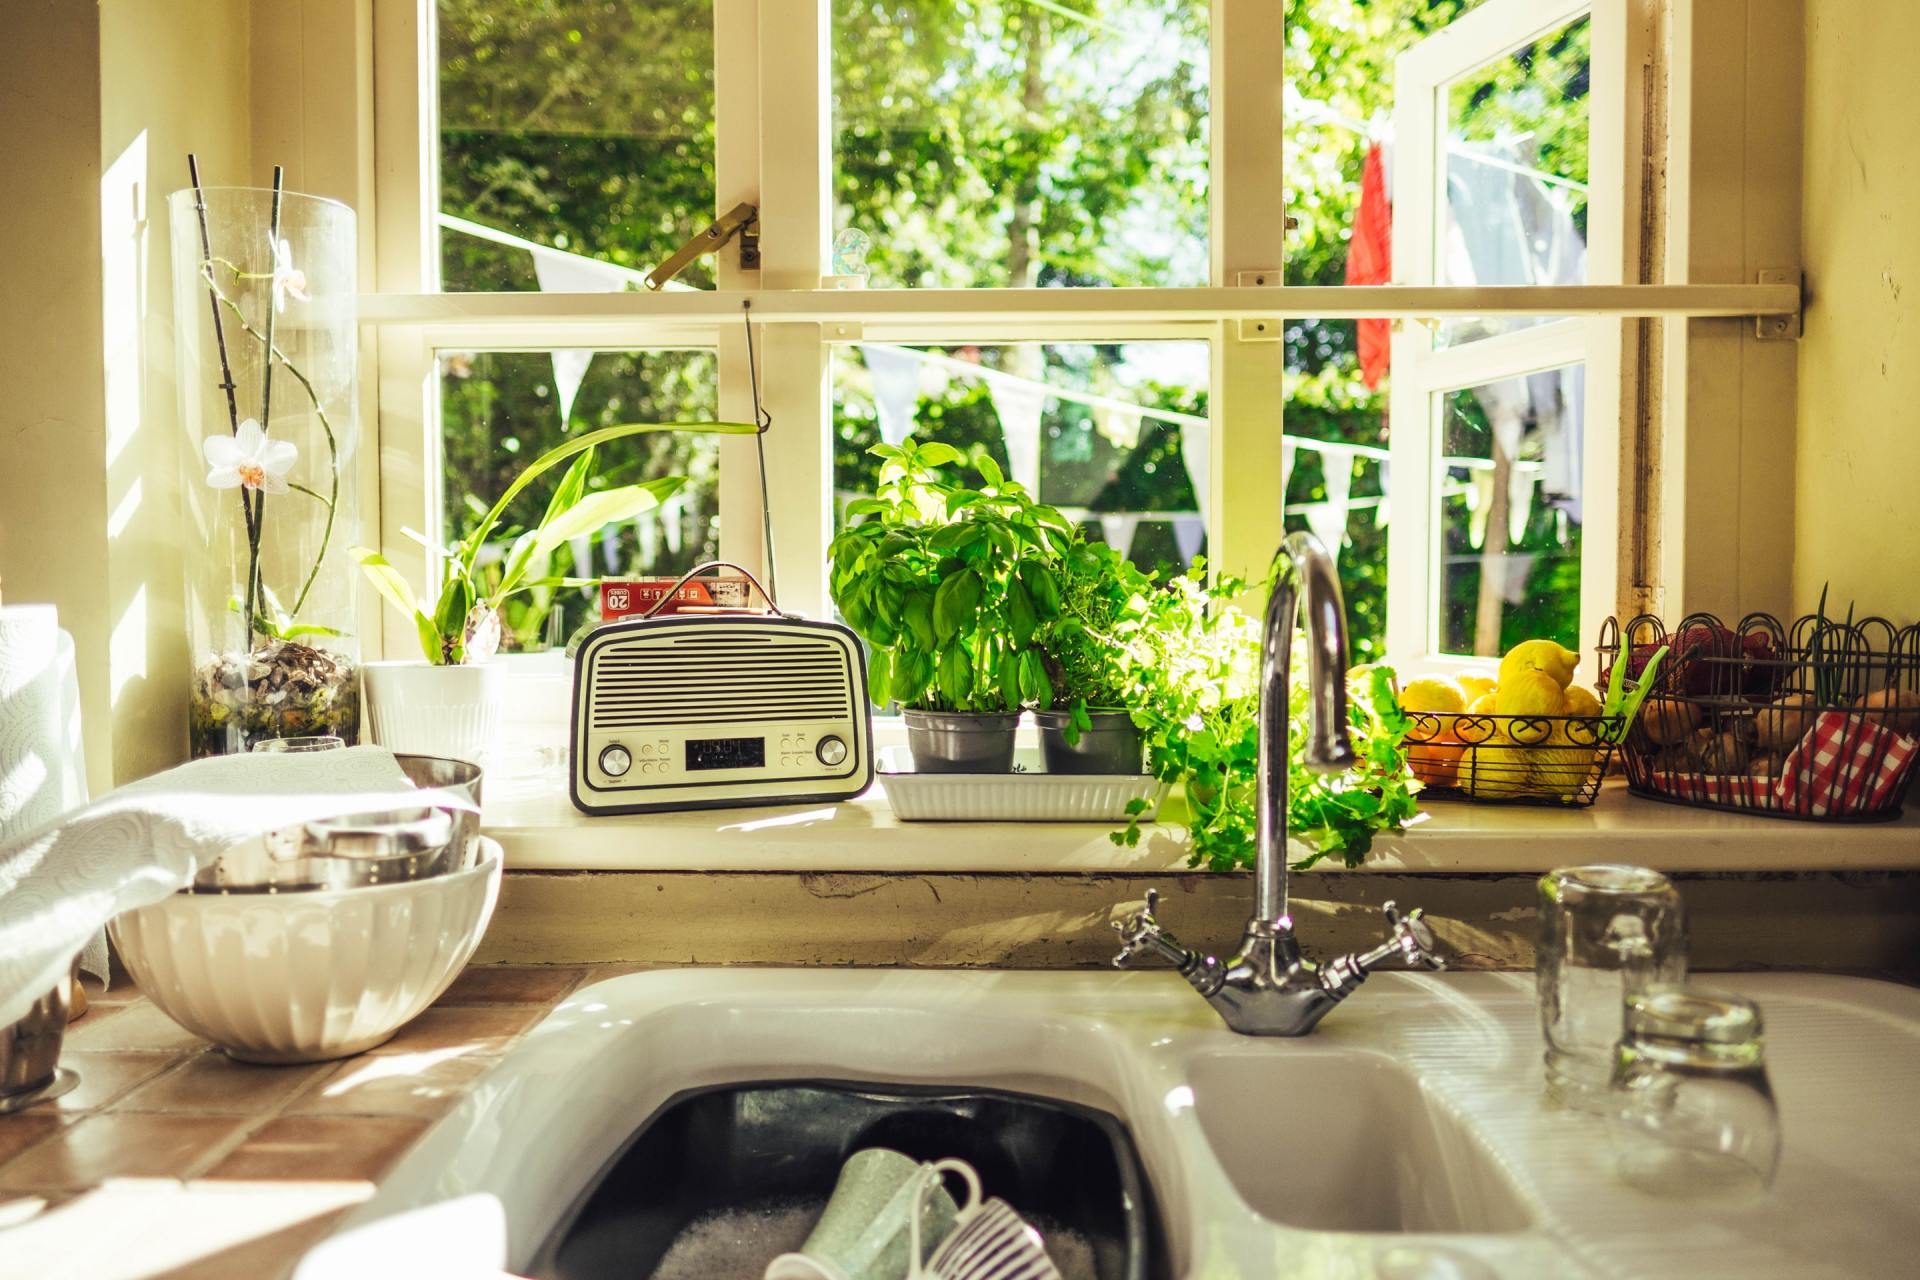 How to choose a farmhouse sink for your kitchen